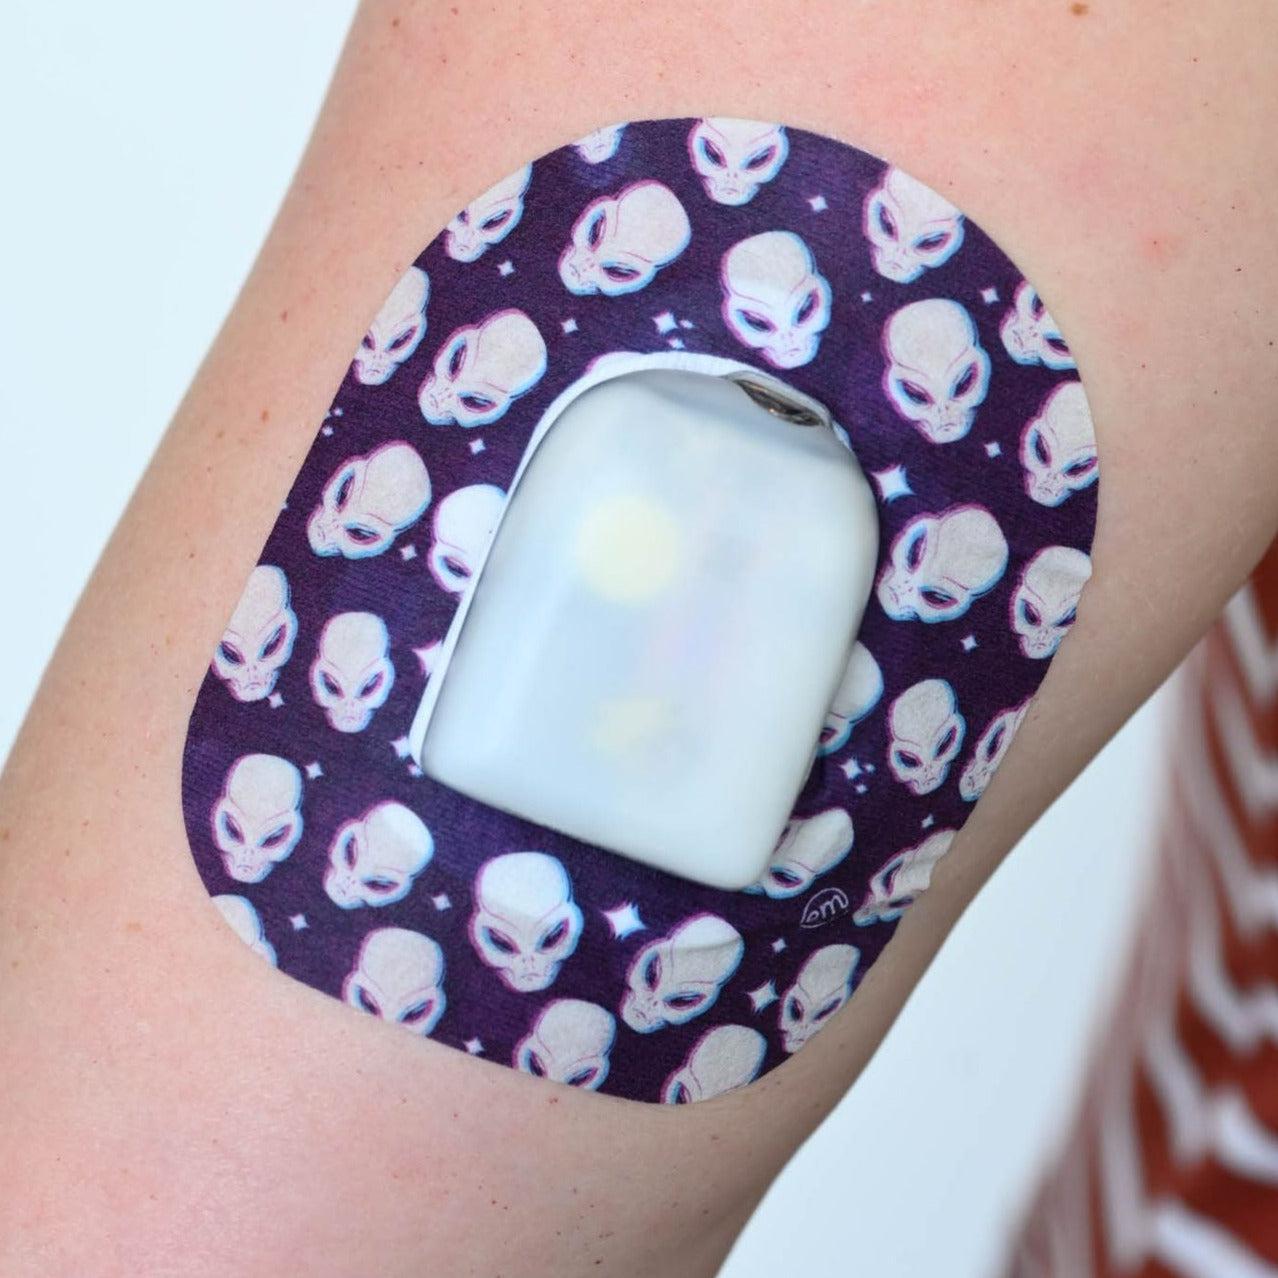 Human arm wearing Alien Pod Patch Design and Omnipod Device